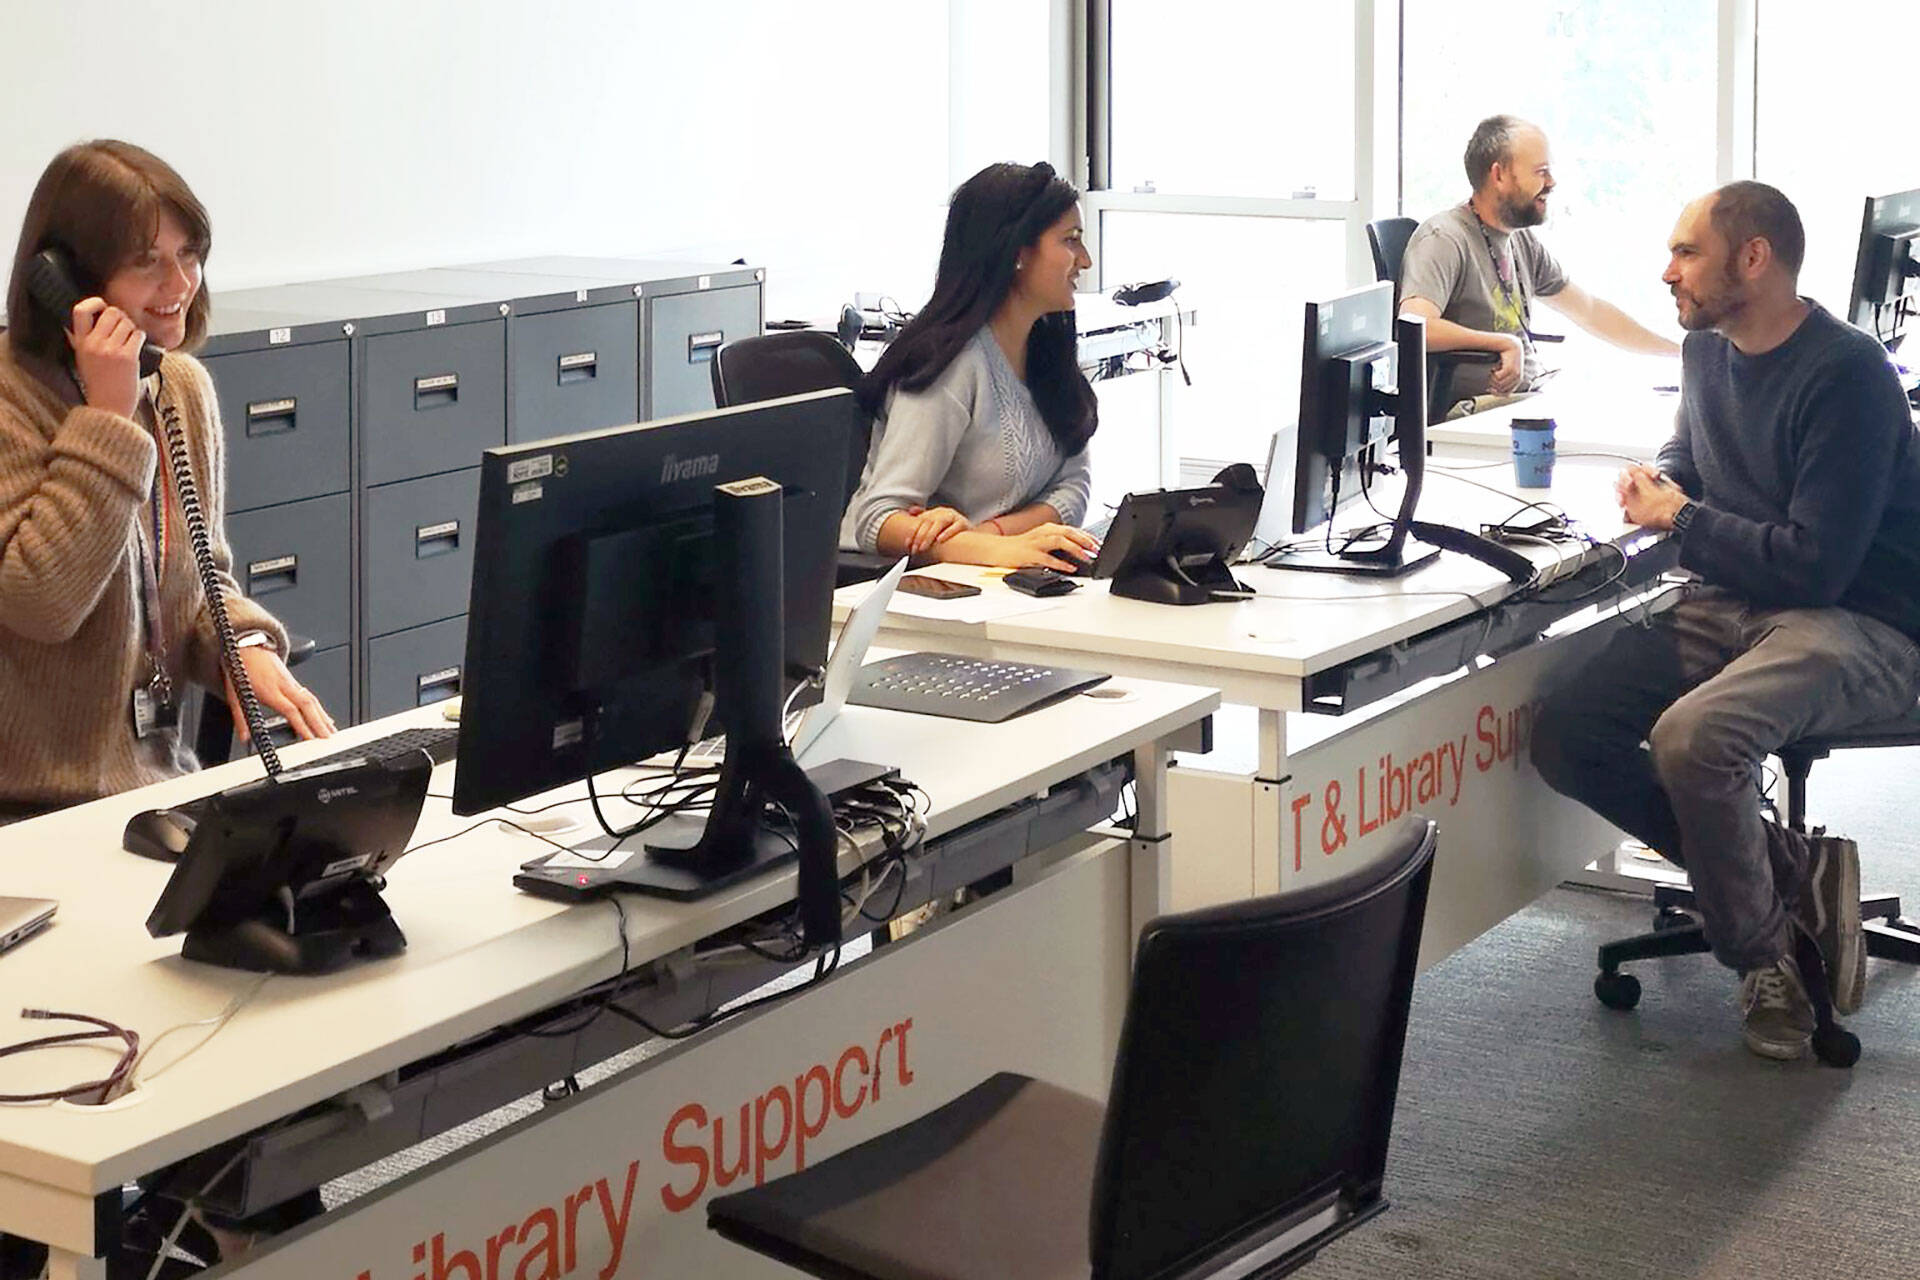 IT & Library support staff